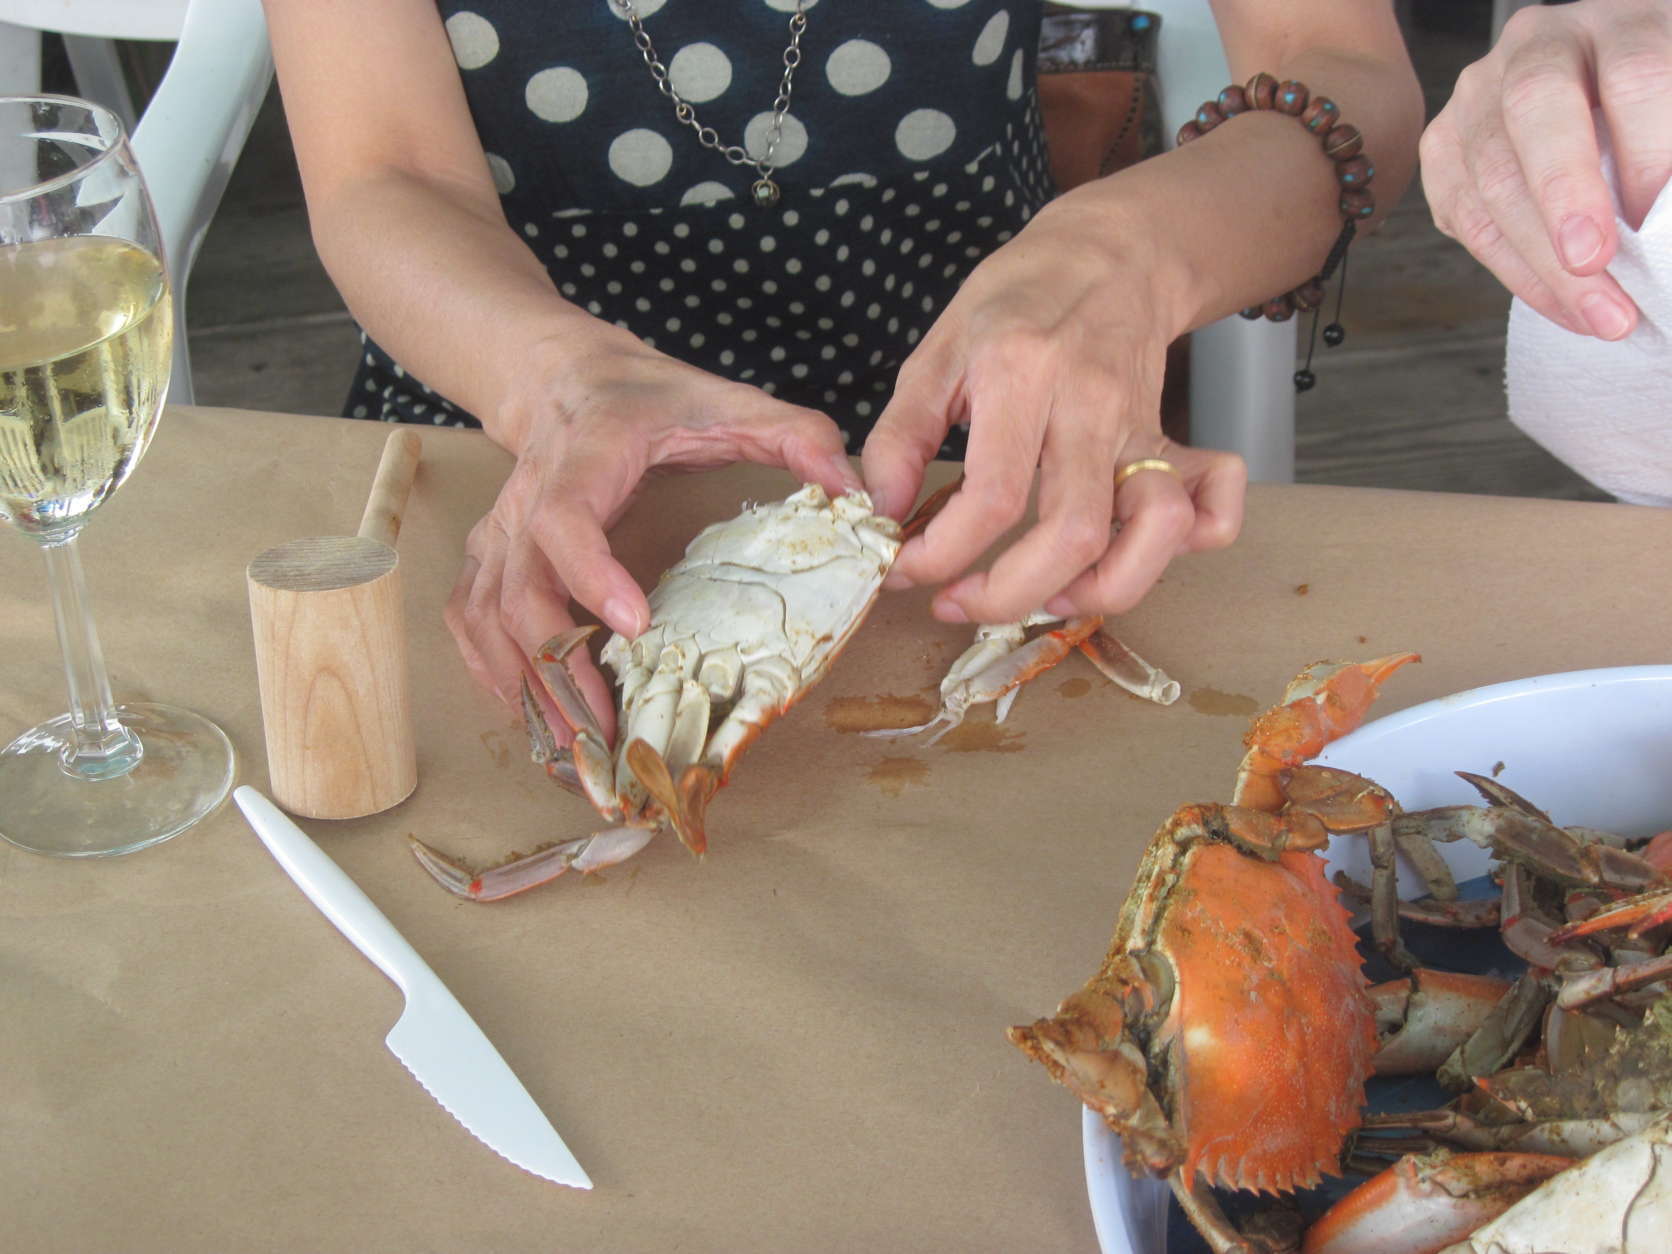 Photo shows a woman picking steamed crabs